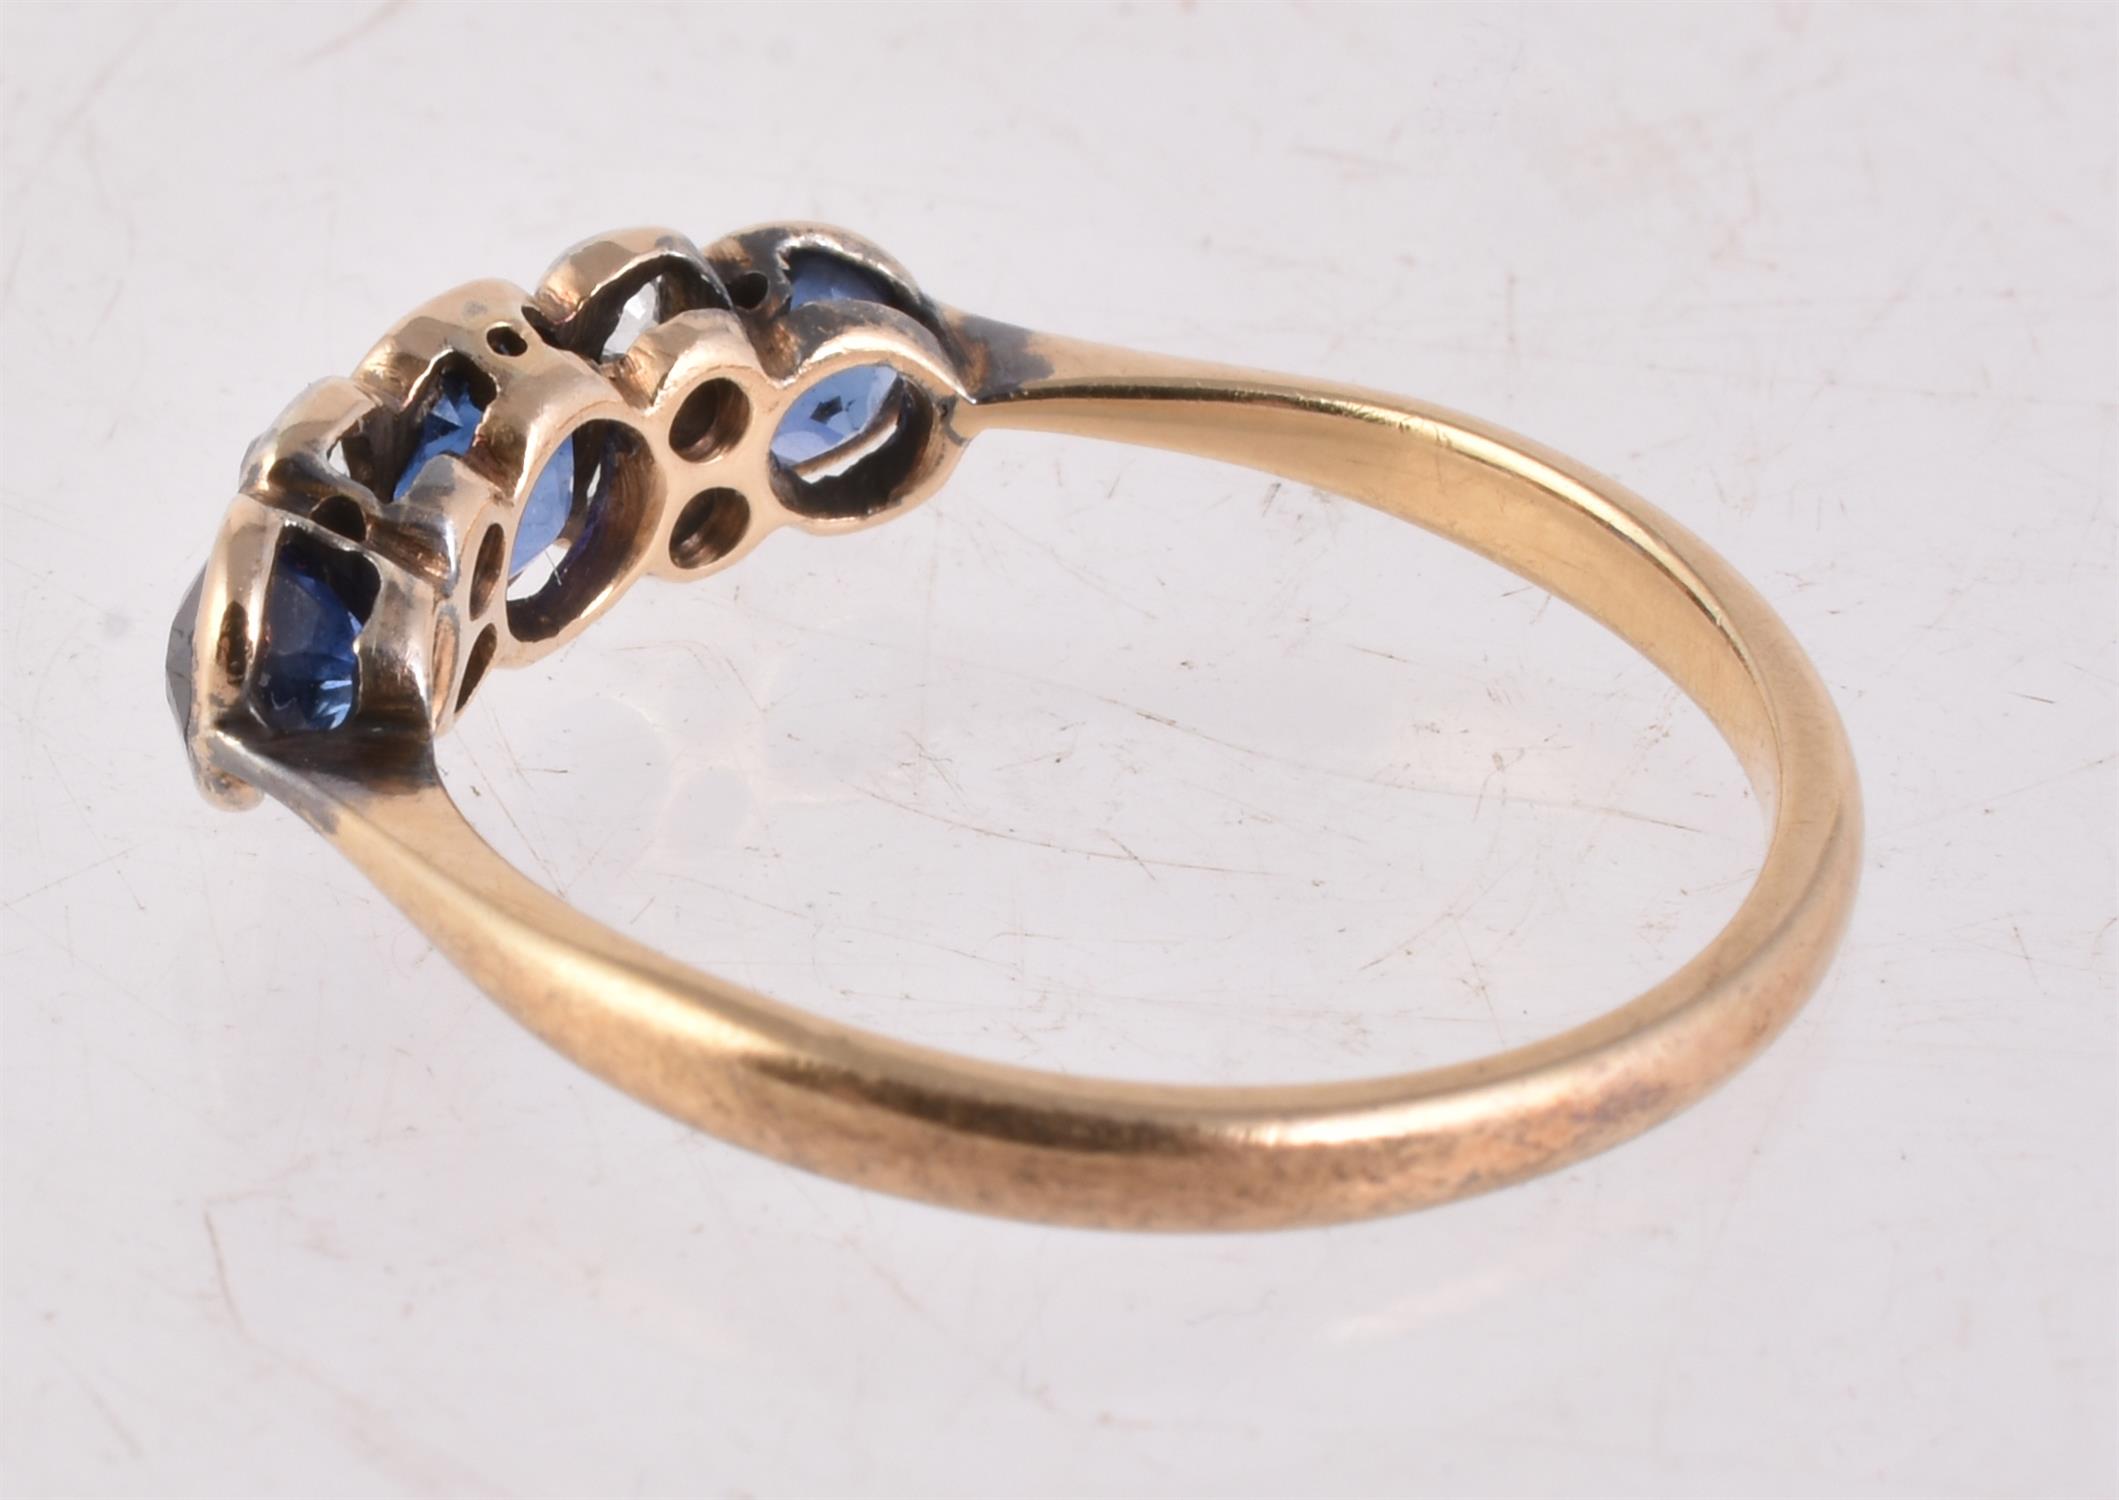 An early 20th century sapphire and diamond seven stone ring - Image 2 of 2